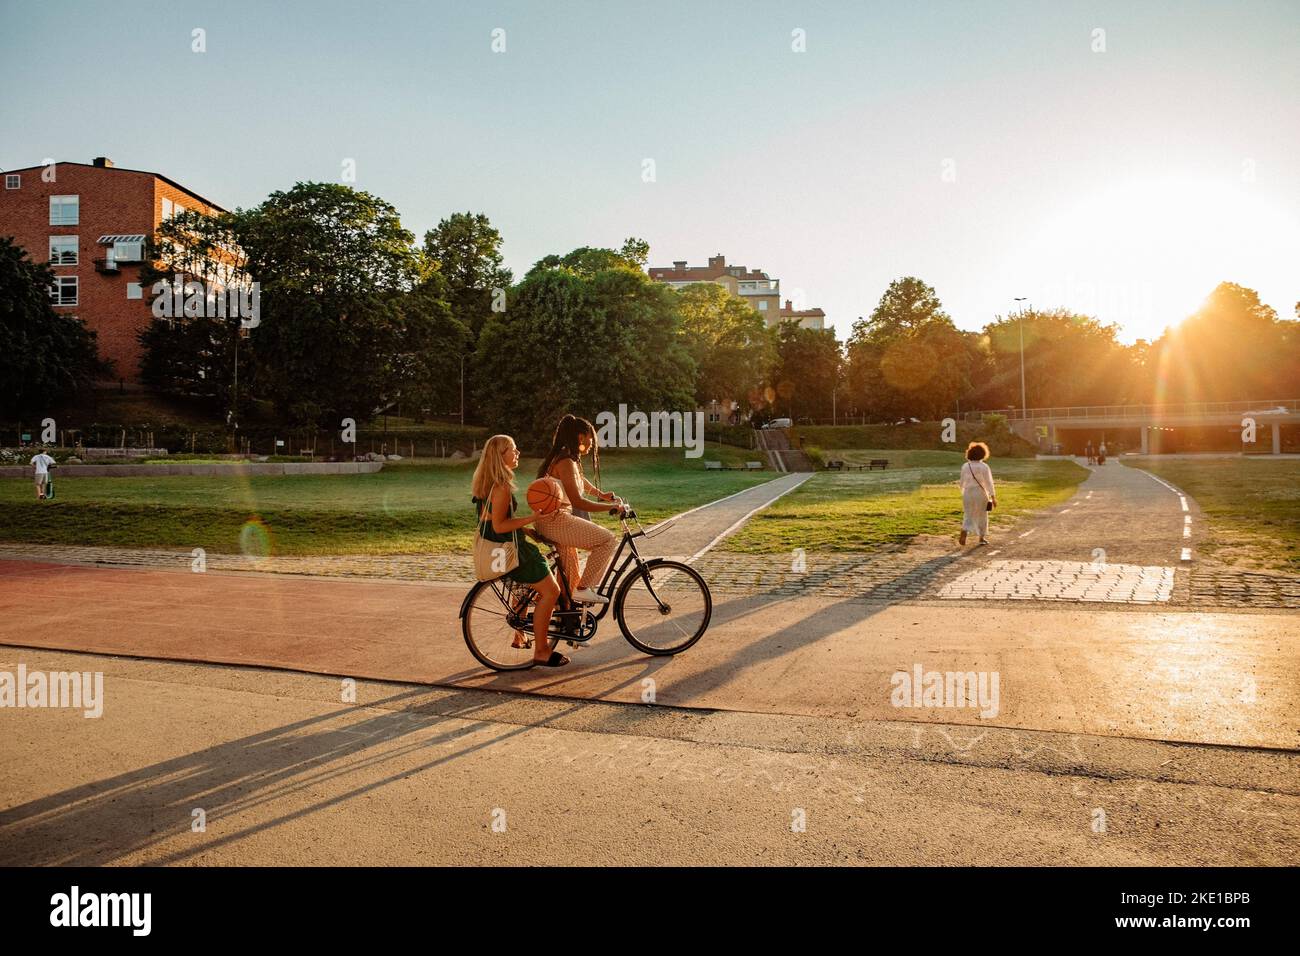 Teenage girl sitting with friend riding bicycle at park during sunset Stock Photo